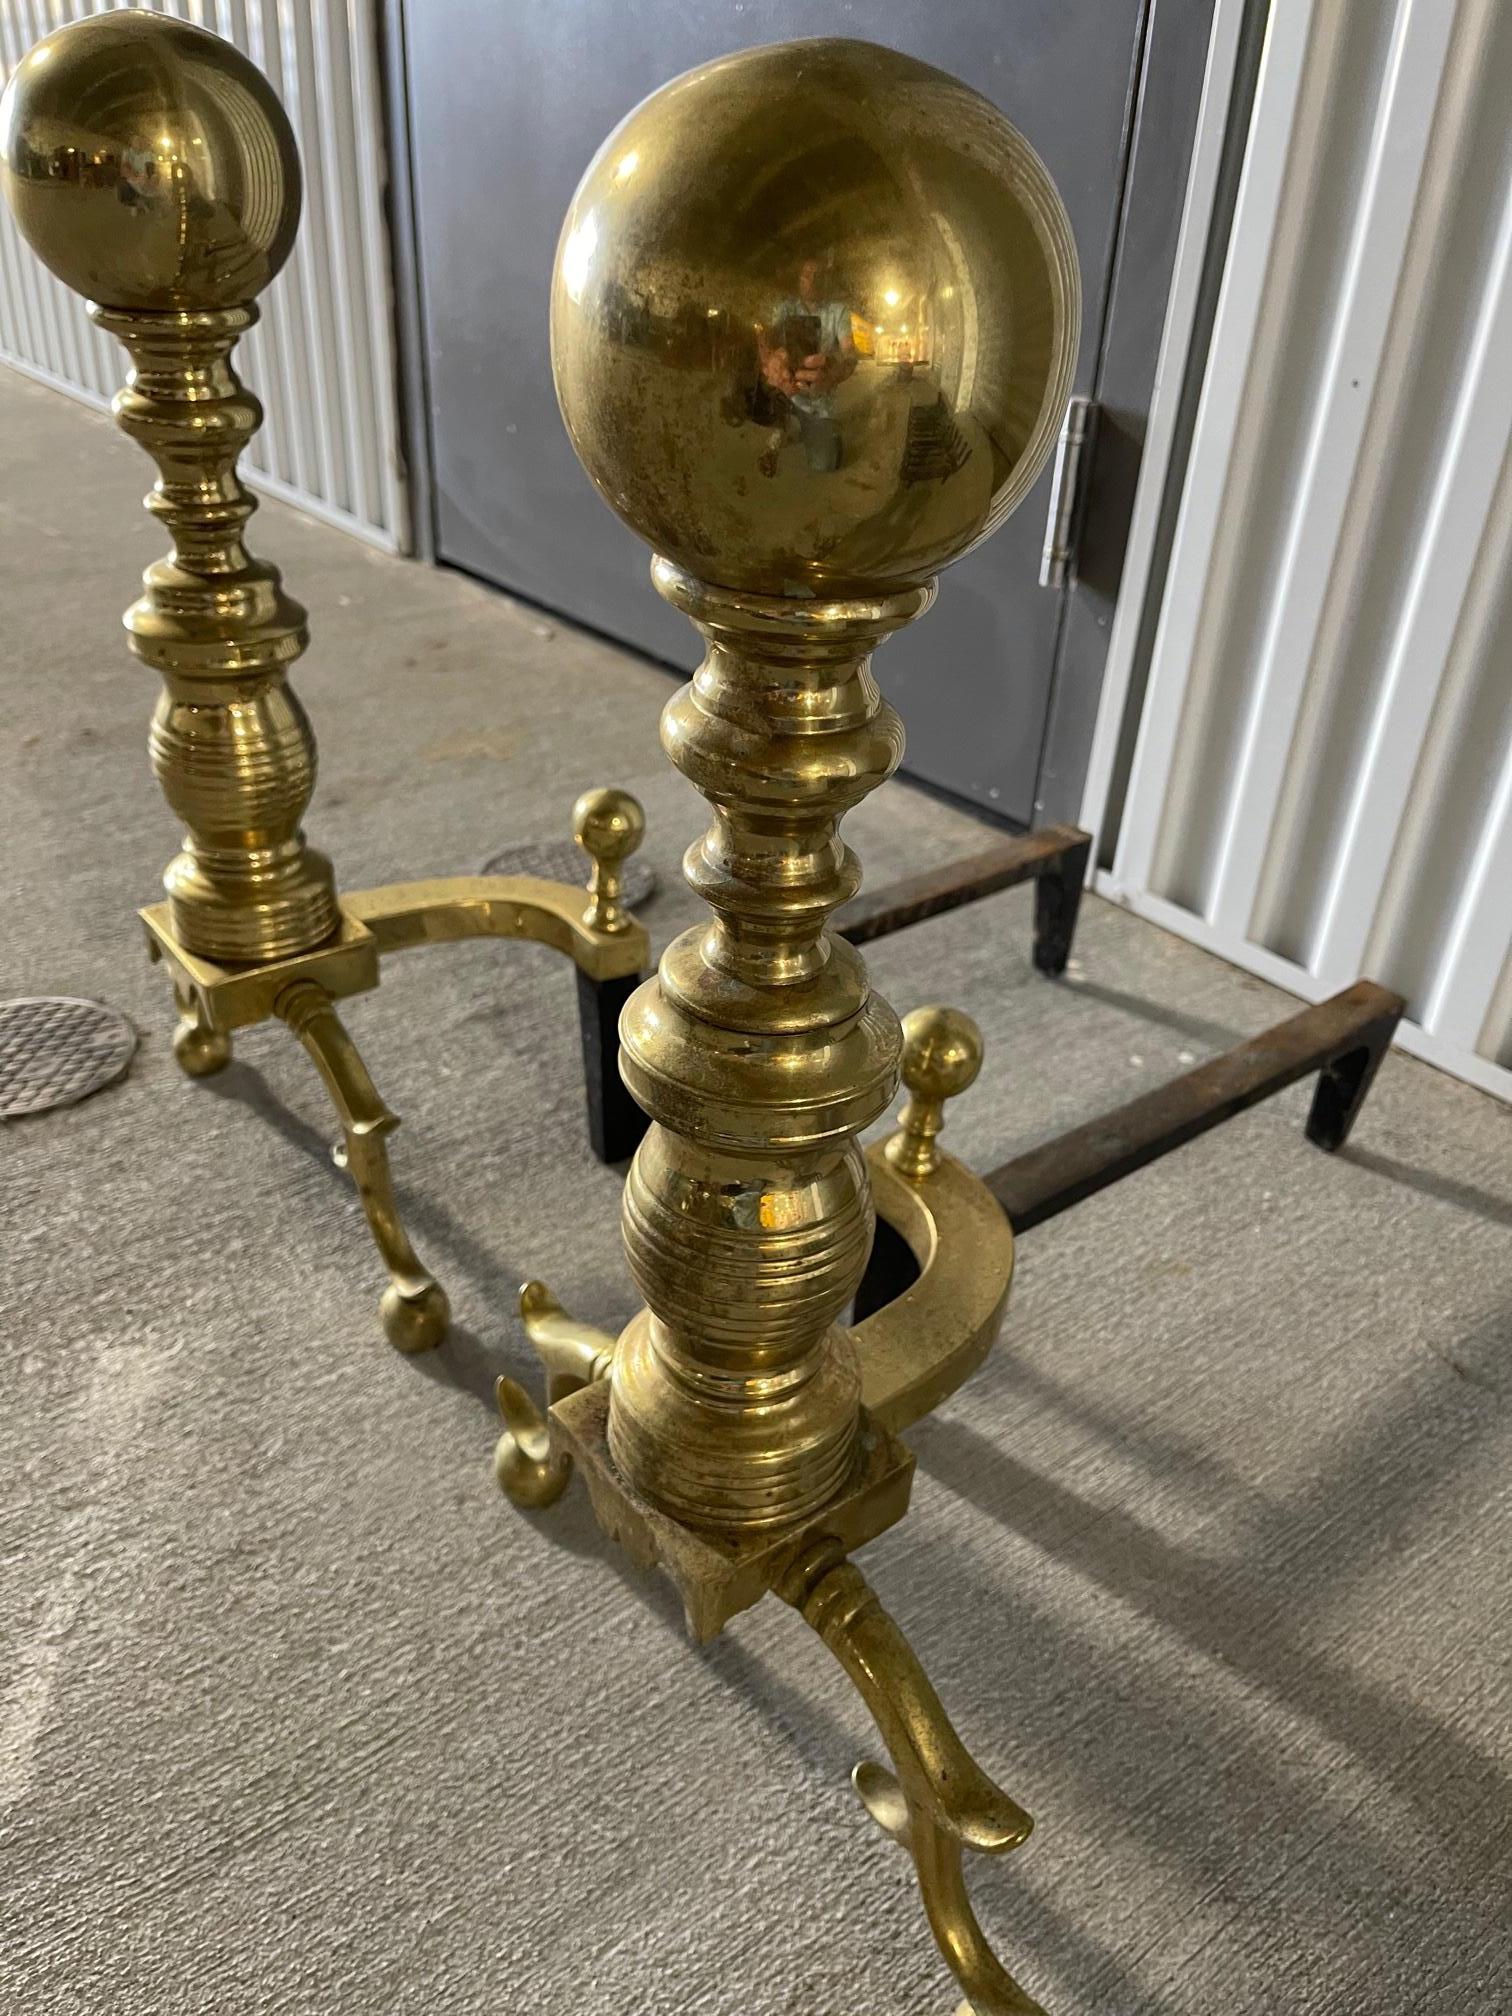 English Pair of Brass Andirons with a Decorative Ball at Top and Feet, 19th Century